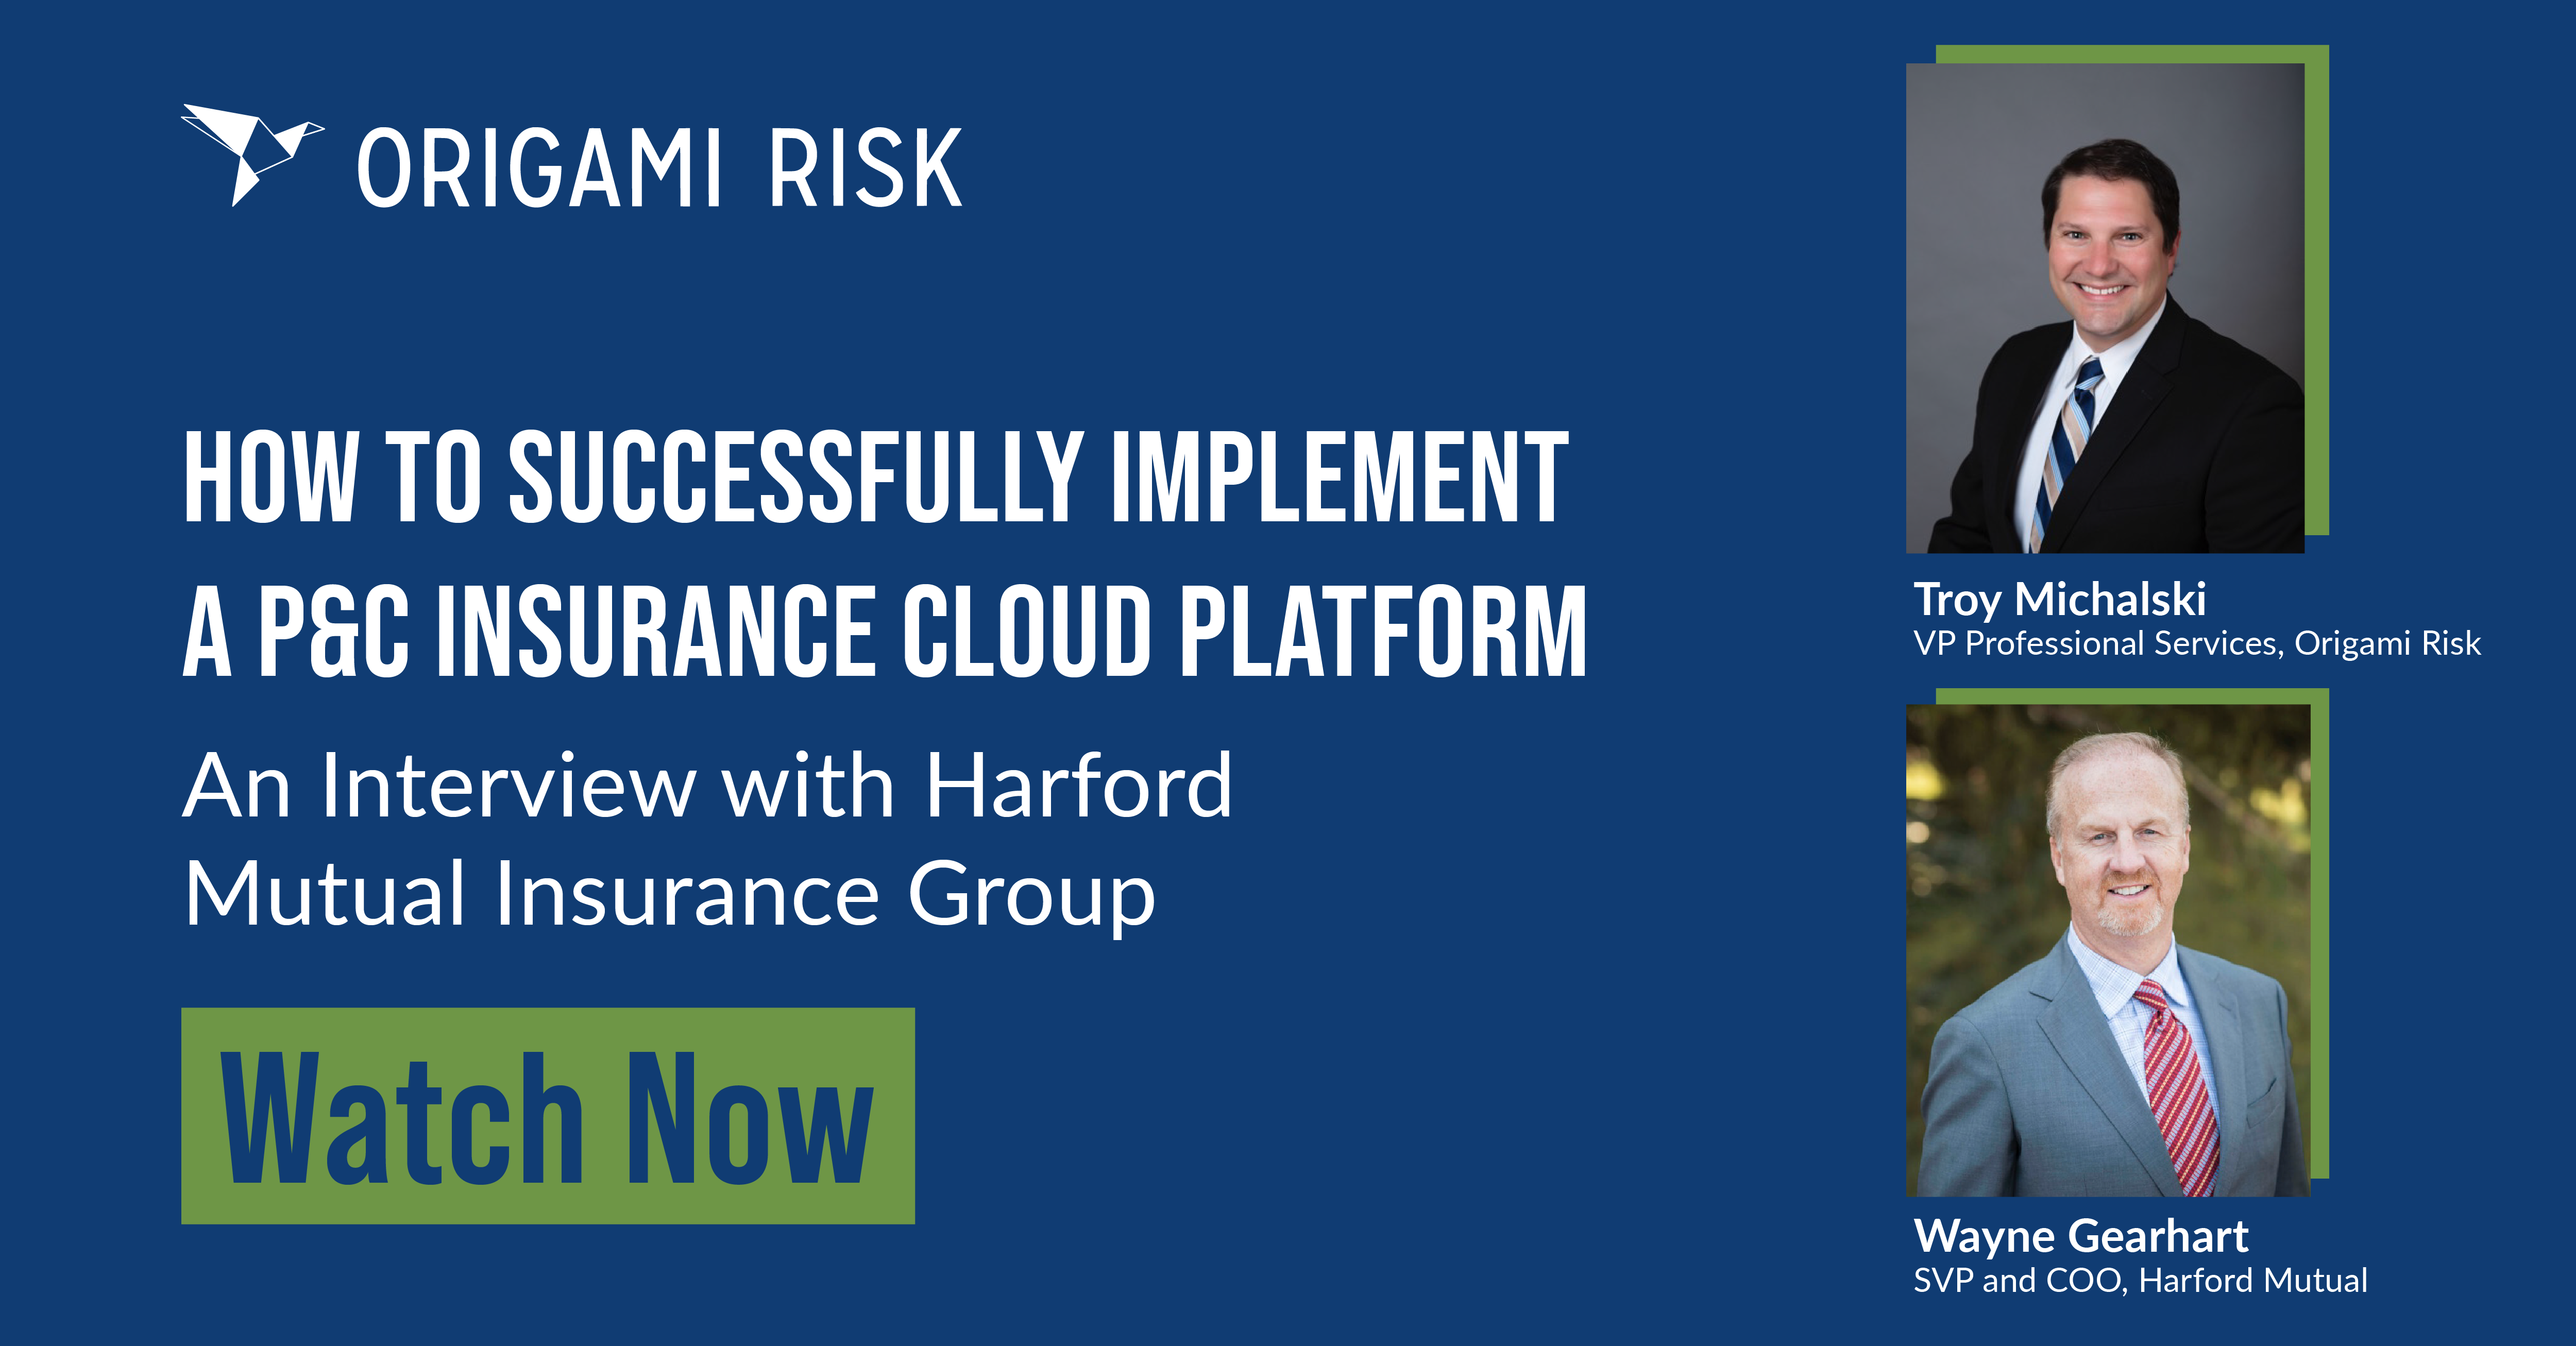 How to Successfully Implement a P&C Insurance Cloud Platform, an interview with Harford Mutual Insurance Group, Watch now